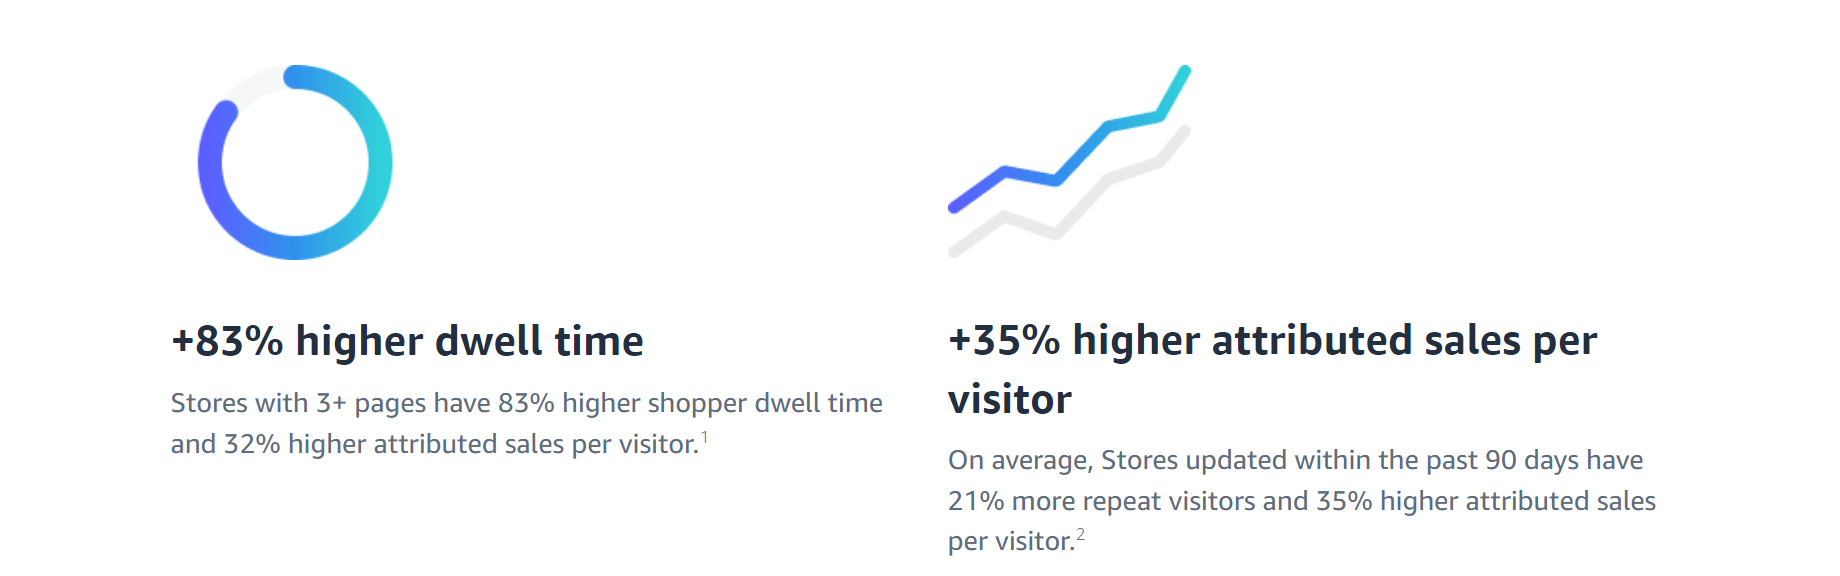 Amazon Stores 83% higher dwell time and 35% higher attributed sales per visitor